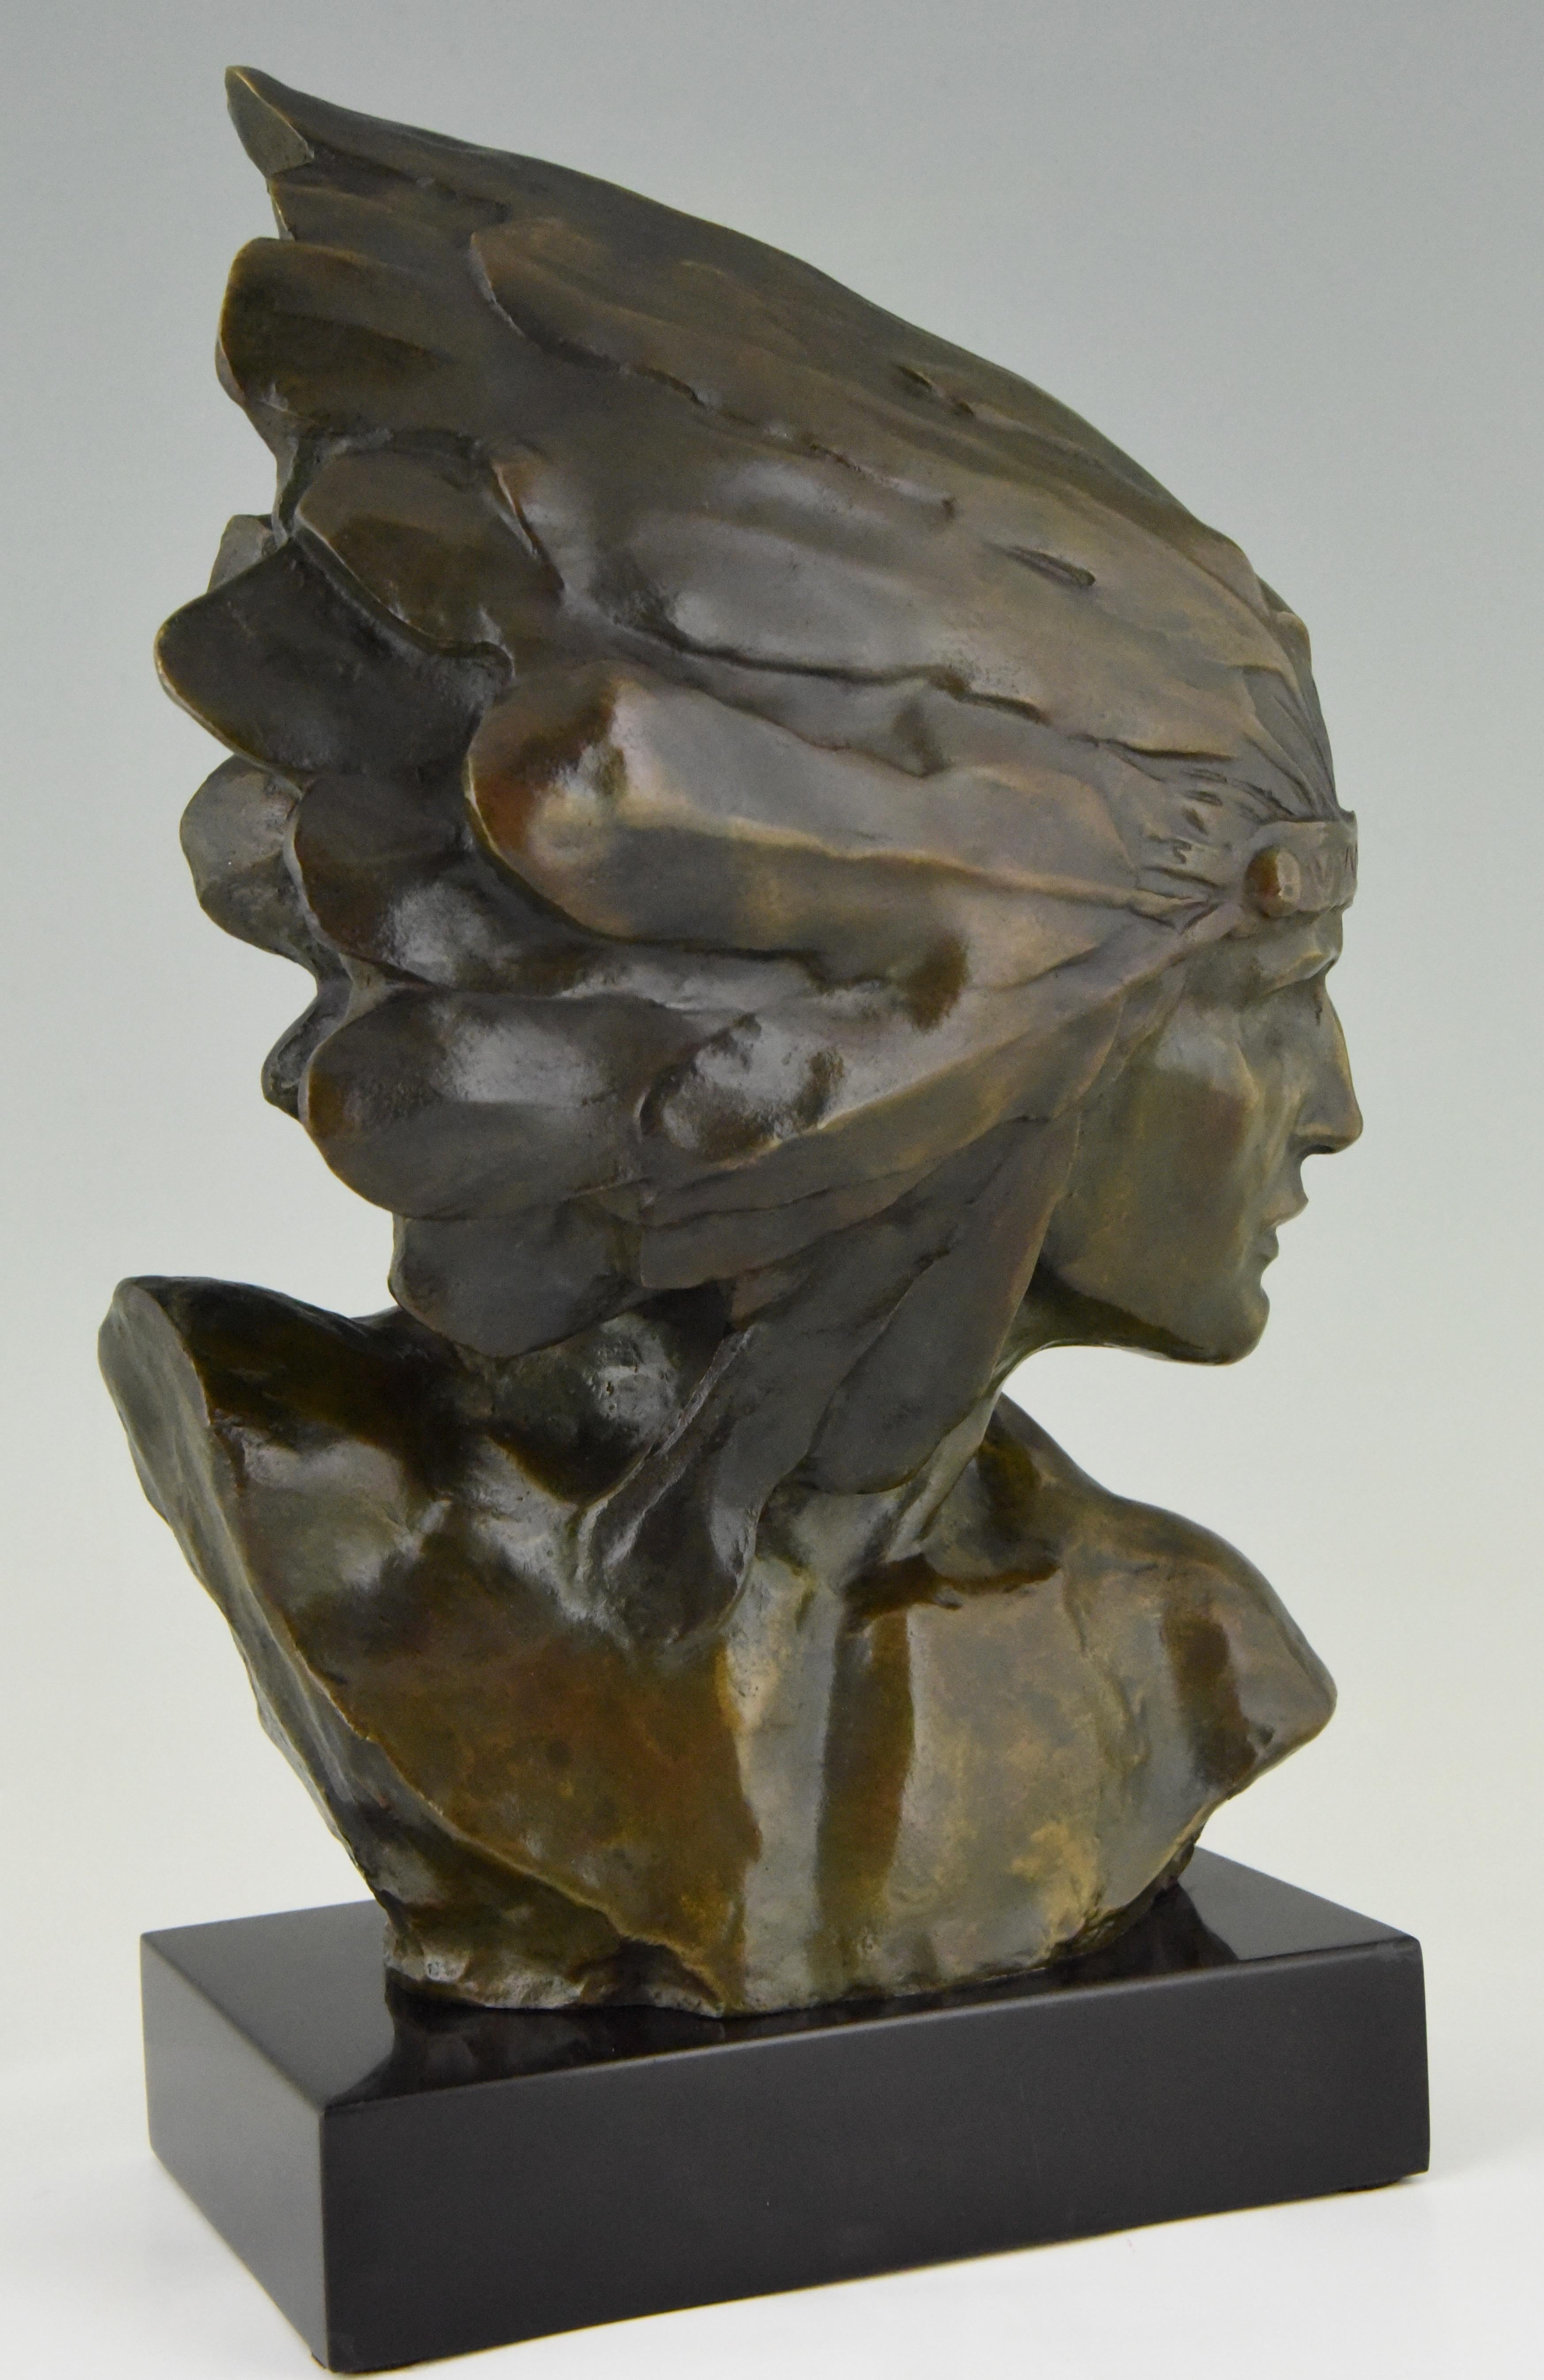 Stunning Art Deco bronze bust of an Indien with headdress.
Signed by the French artist L. Sosson. The sculpture has a lovely green patina and stands on a Belgian Black marble base. Ca 1930. 

Literature:
